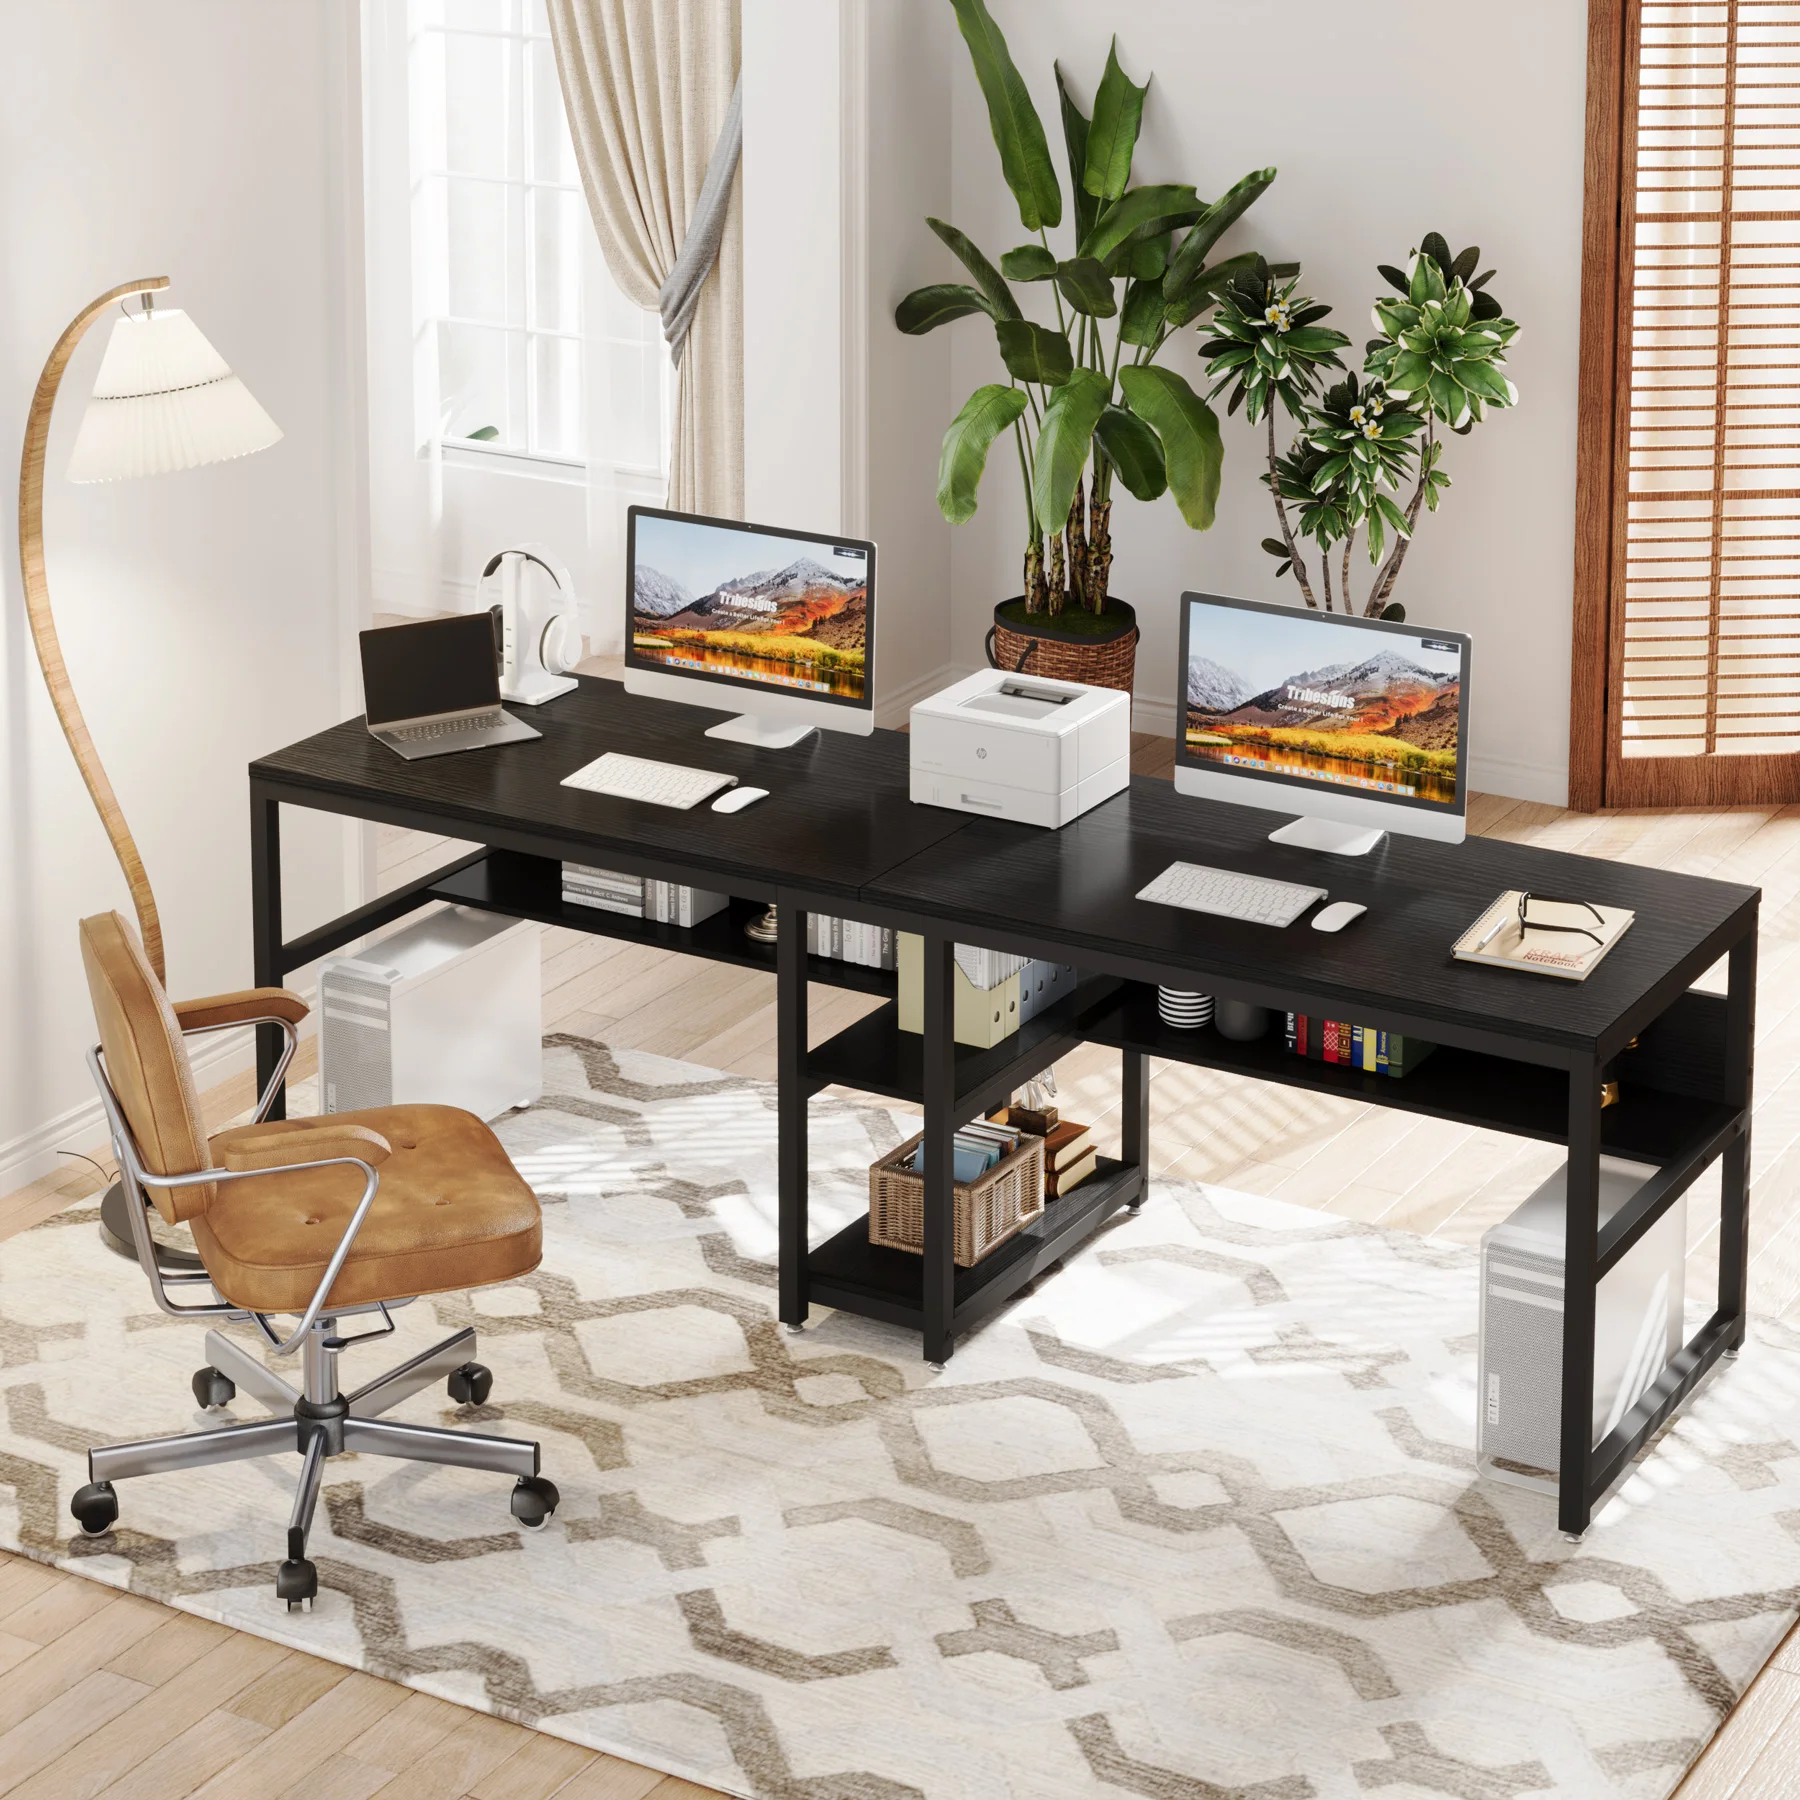 Top Quality Study Writing Desk Modern Office Adult Study Computer Table For Two People